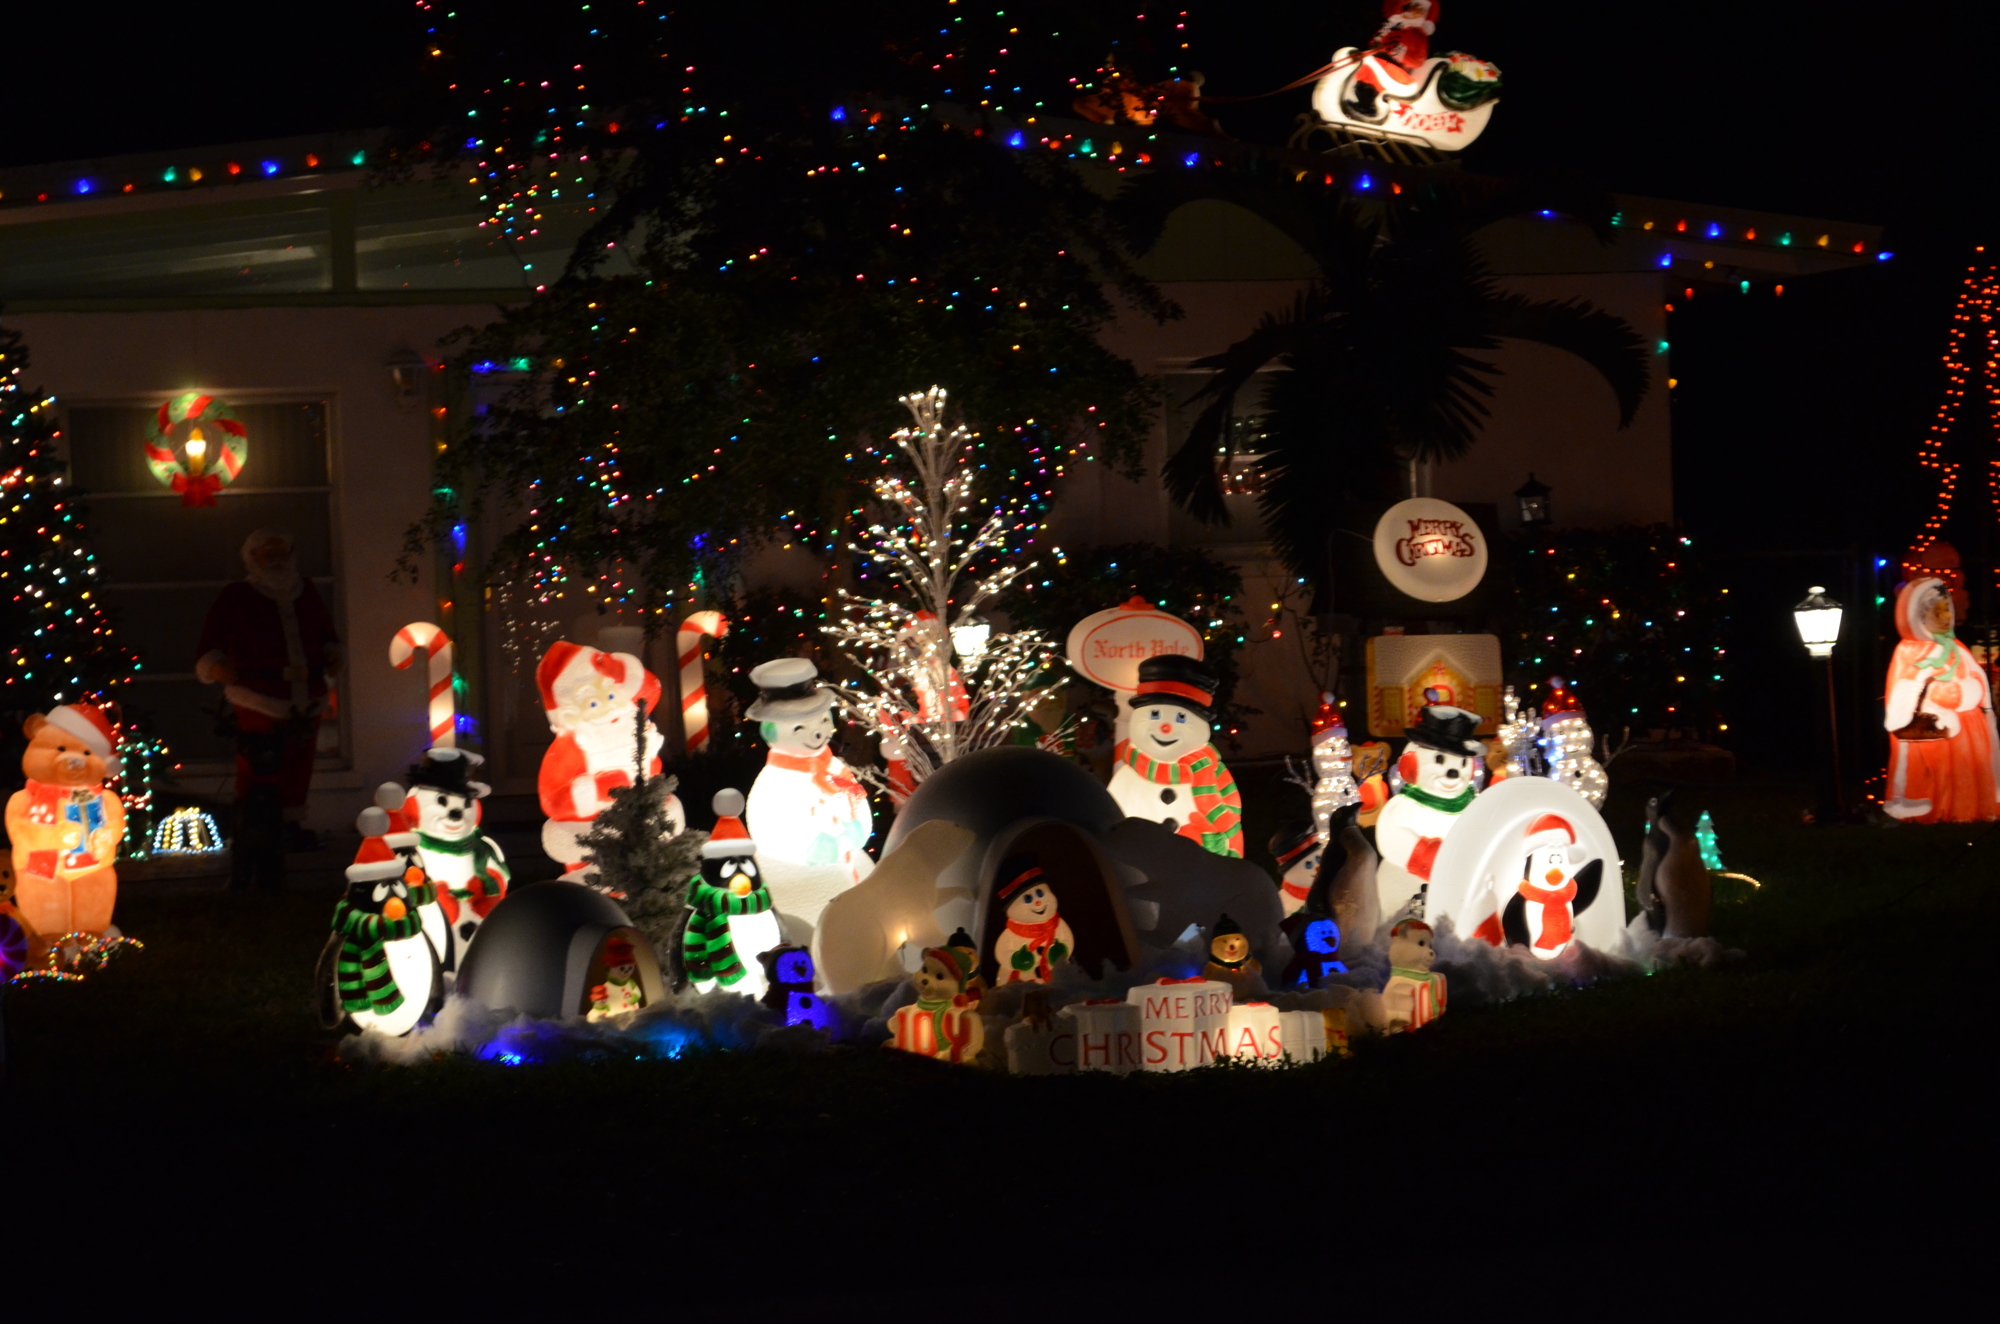 The home on 2834 Browning St. filled the lawn with decorations and lights.